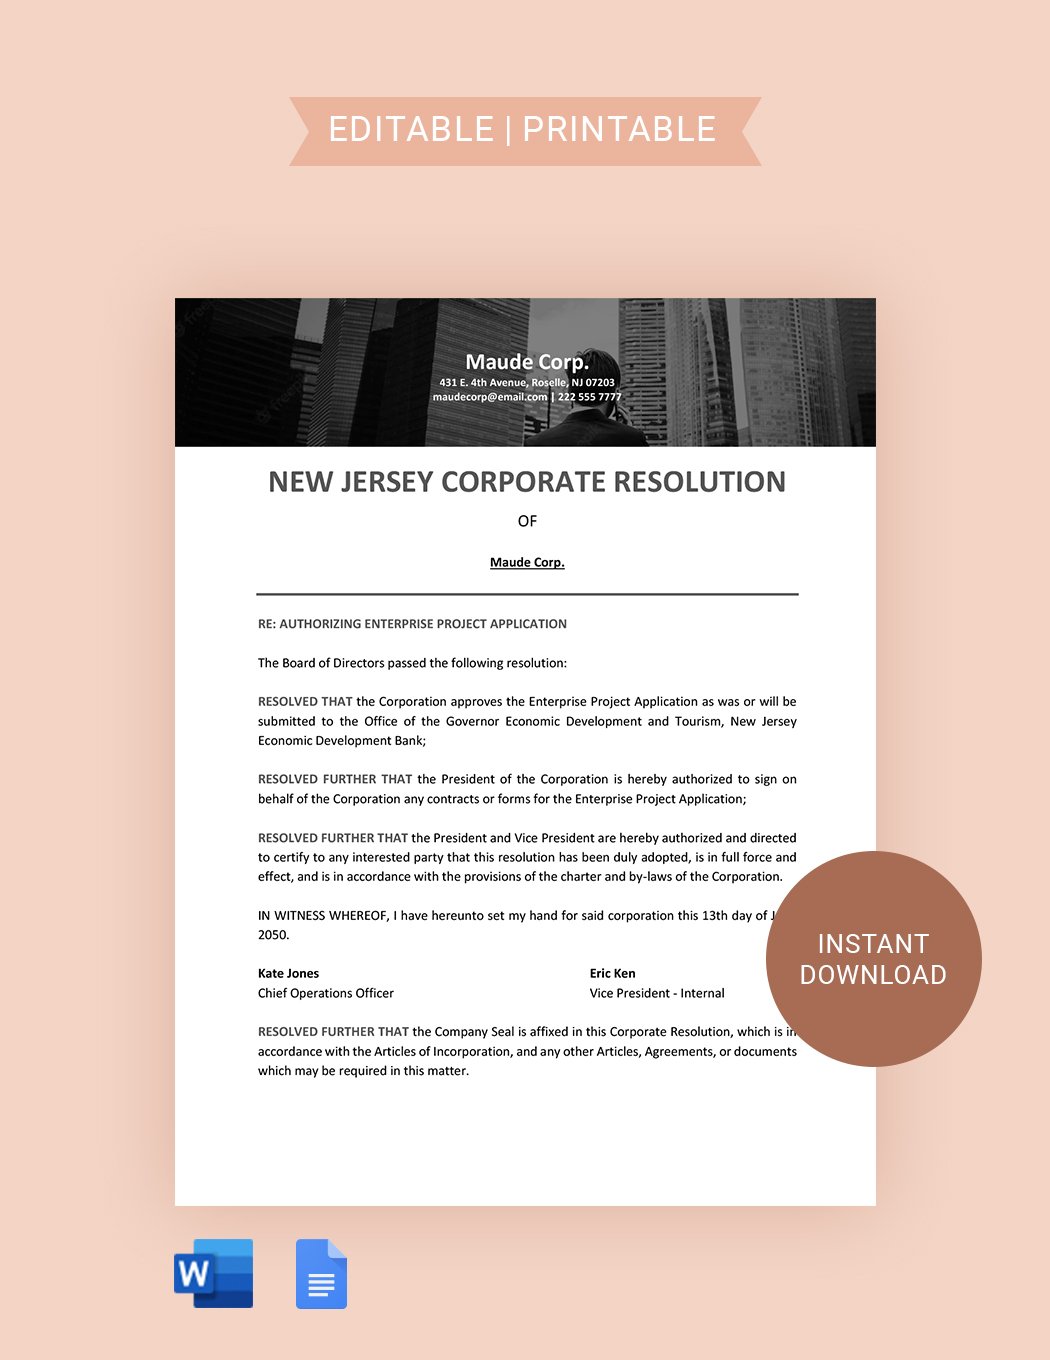 New Jersey Corporate Resolution Template in Word, Google Docs